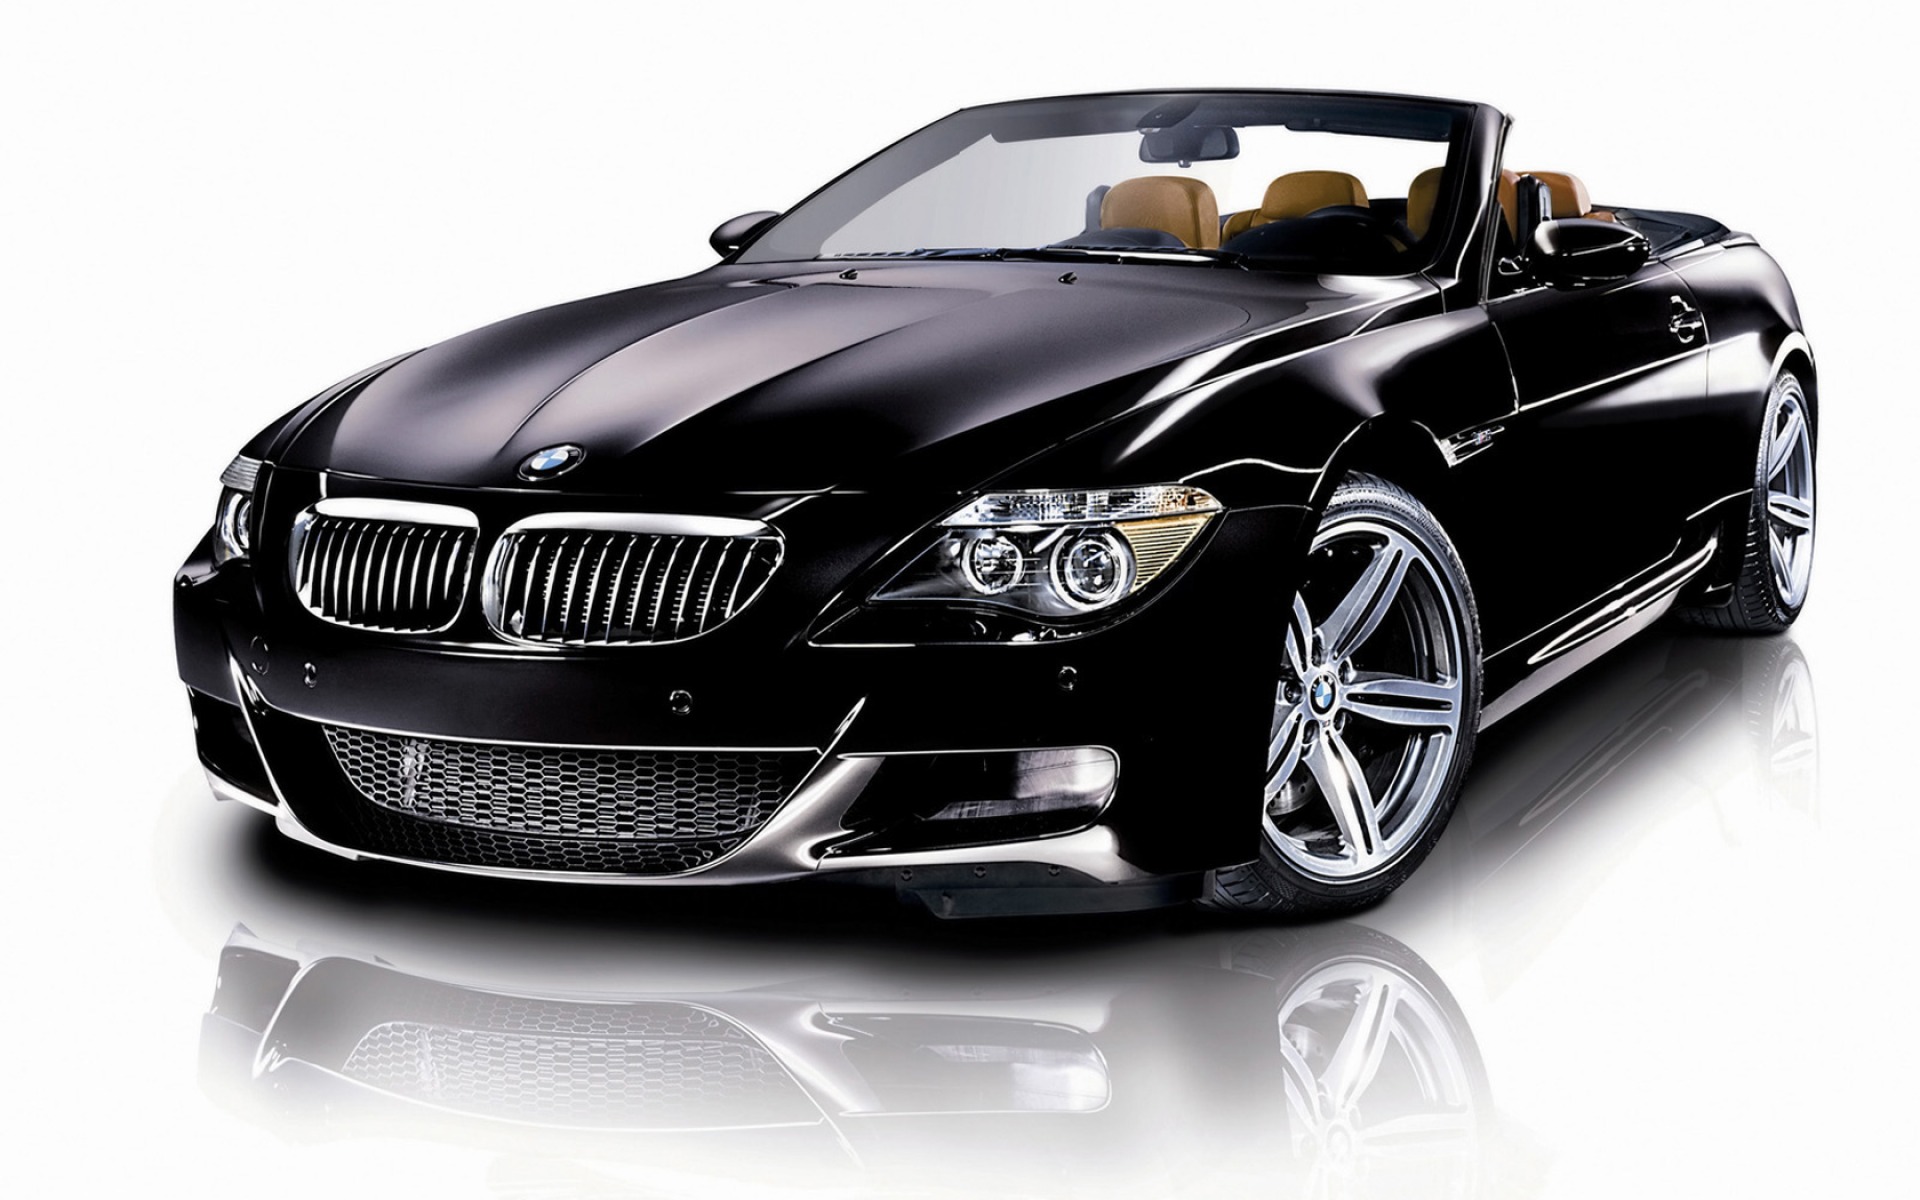 Bmw M6 Convertible Wallpaper Cars In Jpg Format For